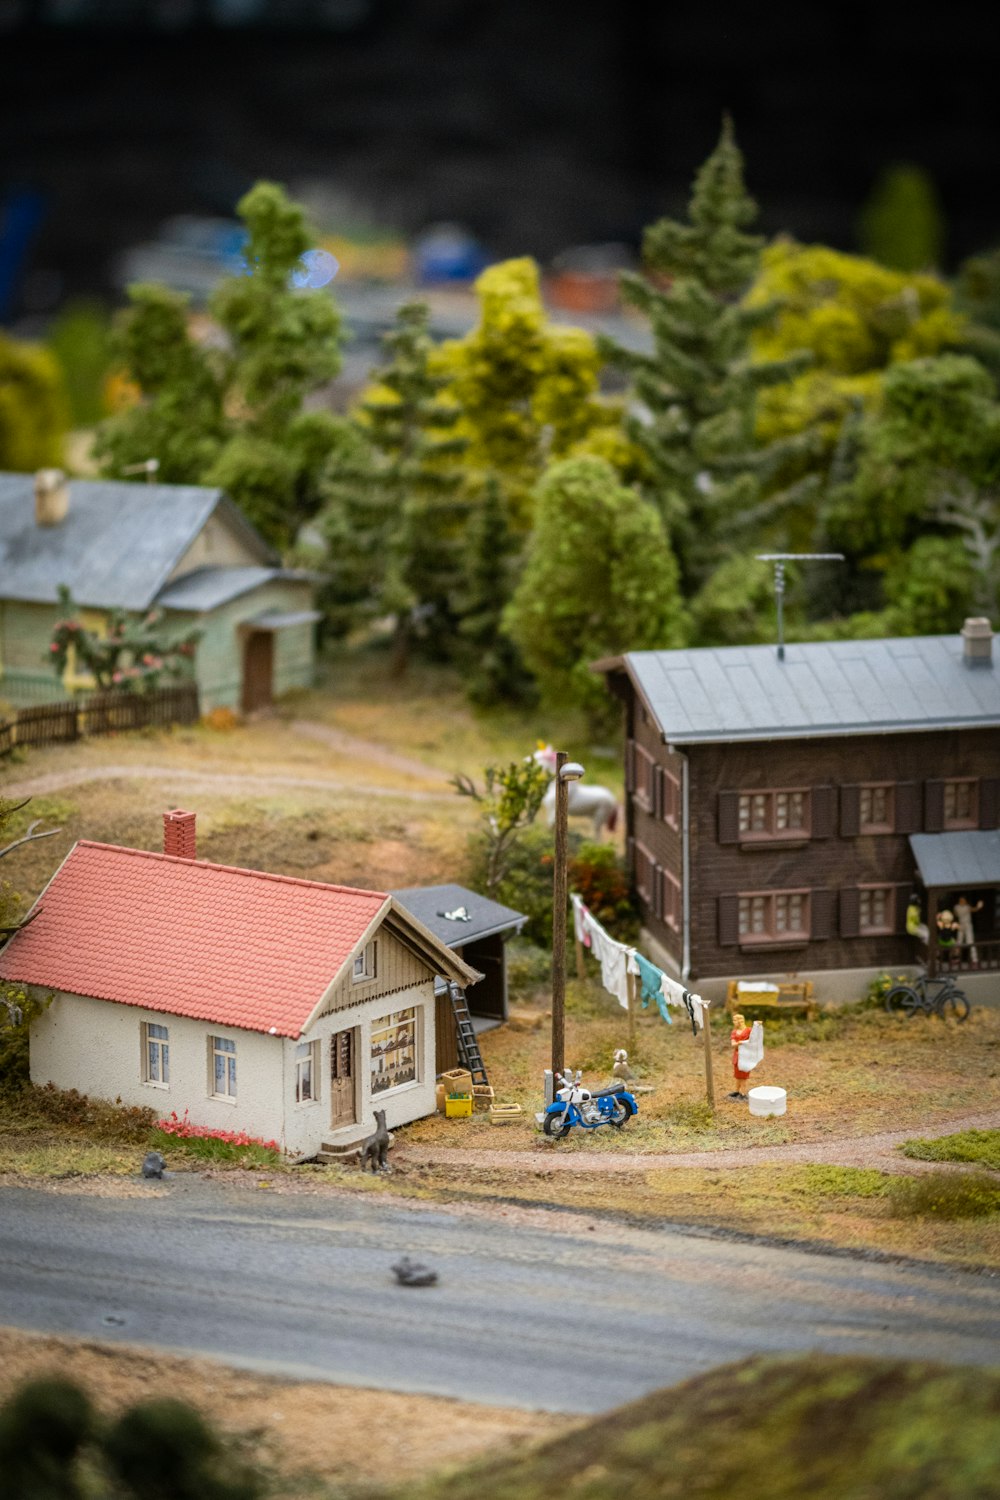 a model of a small town with a red roof